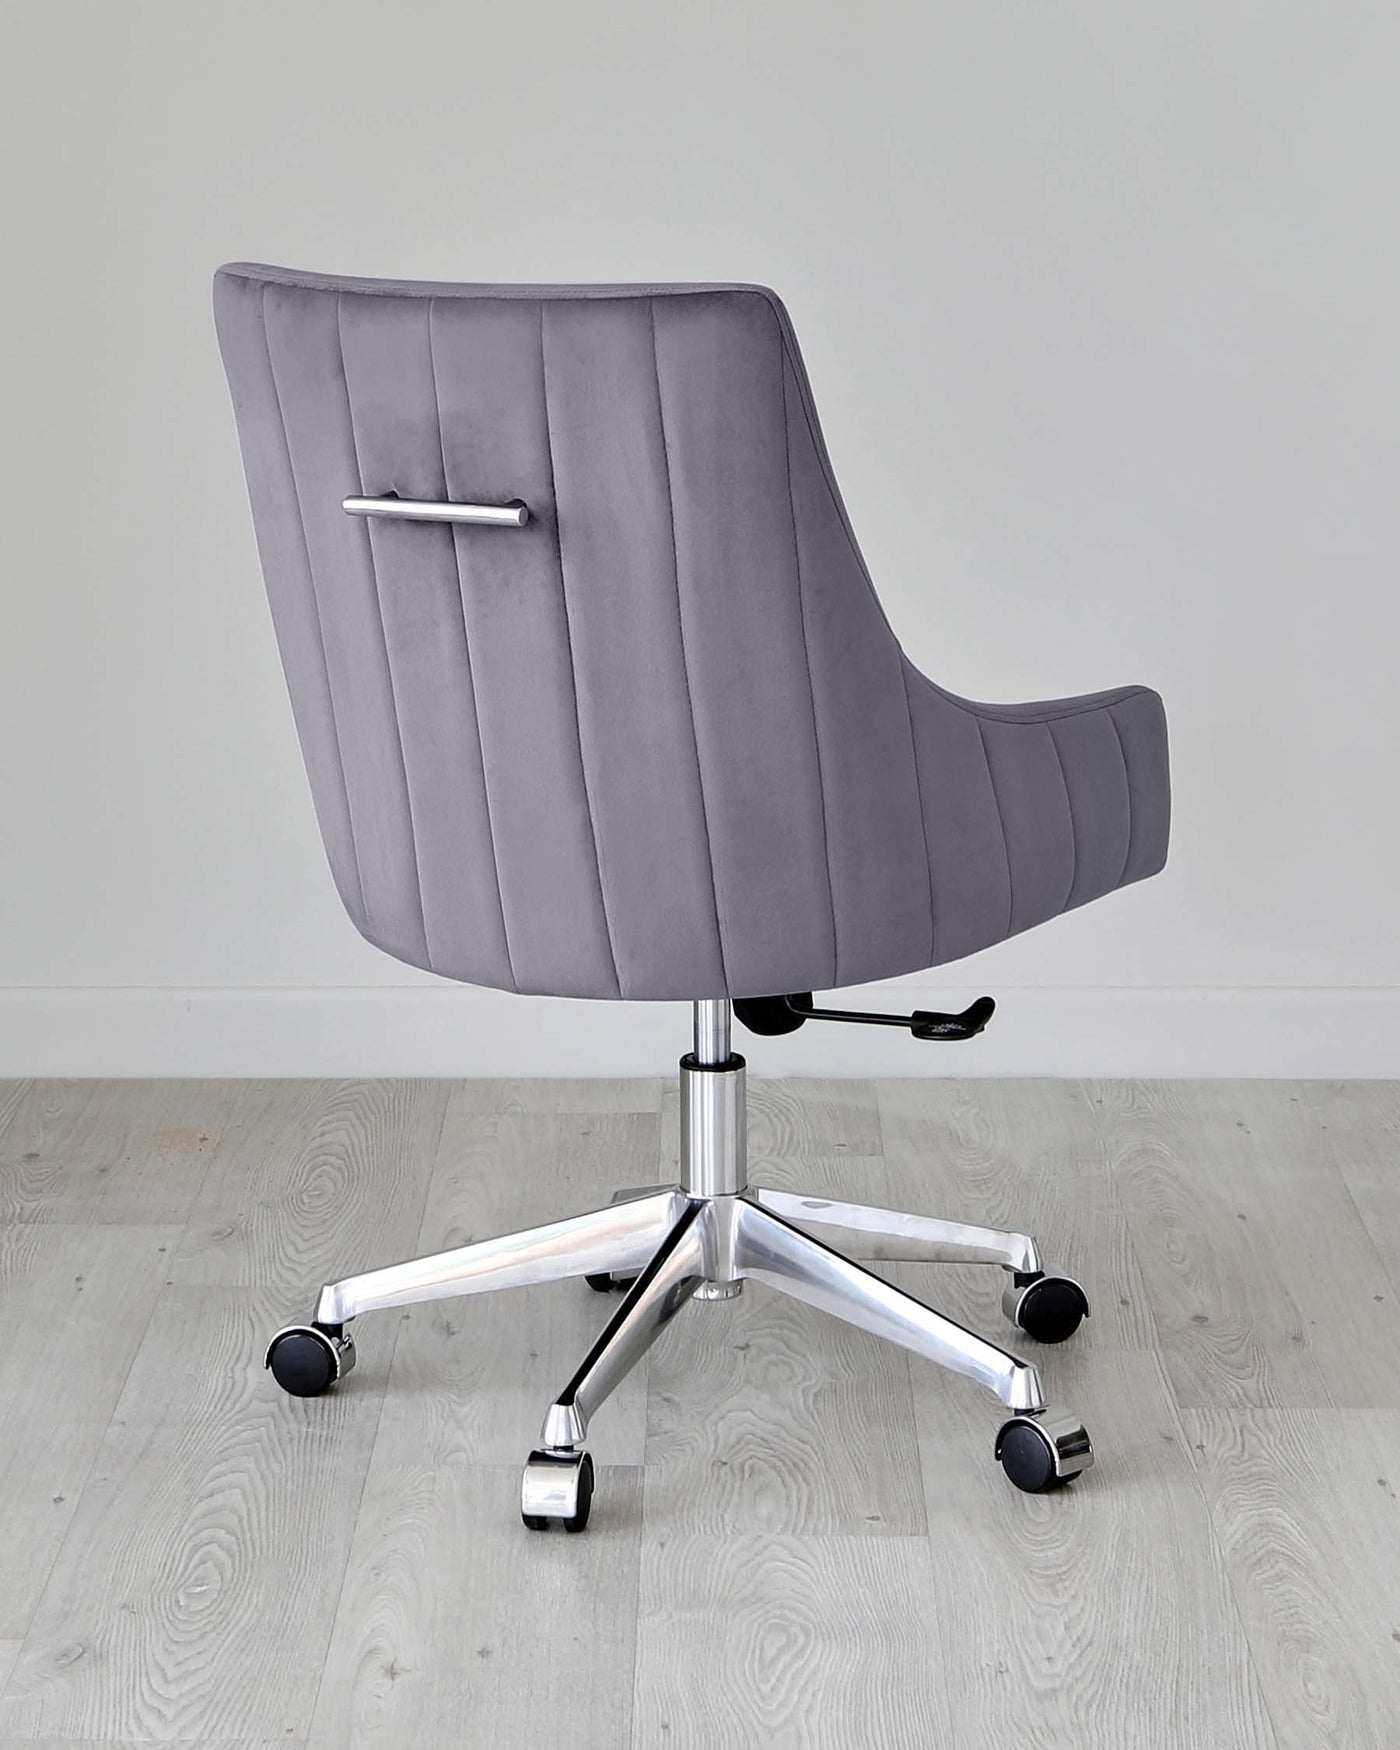 Modern grey office chair with horizontal channel tufting, a high back, sleek armrests, and a polished chrome base with five casters.